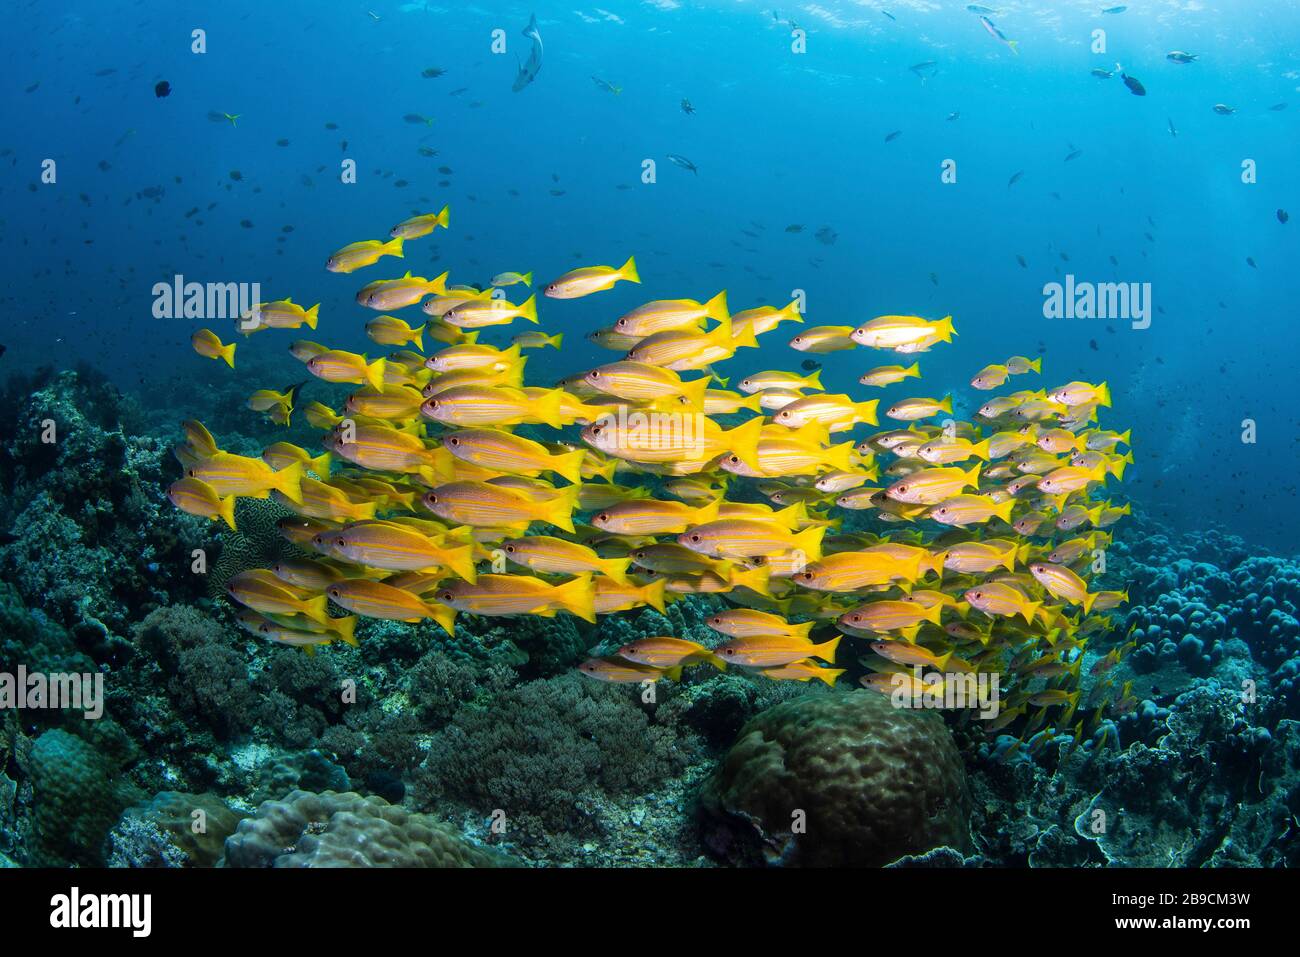 Schooling fish in vibrant yellow hover over a coral reef in Raja Ampat, Indonesia. Stock Photo